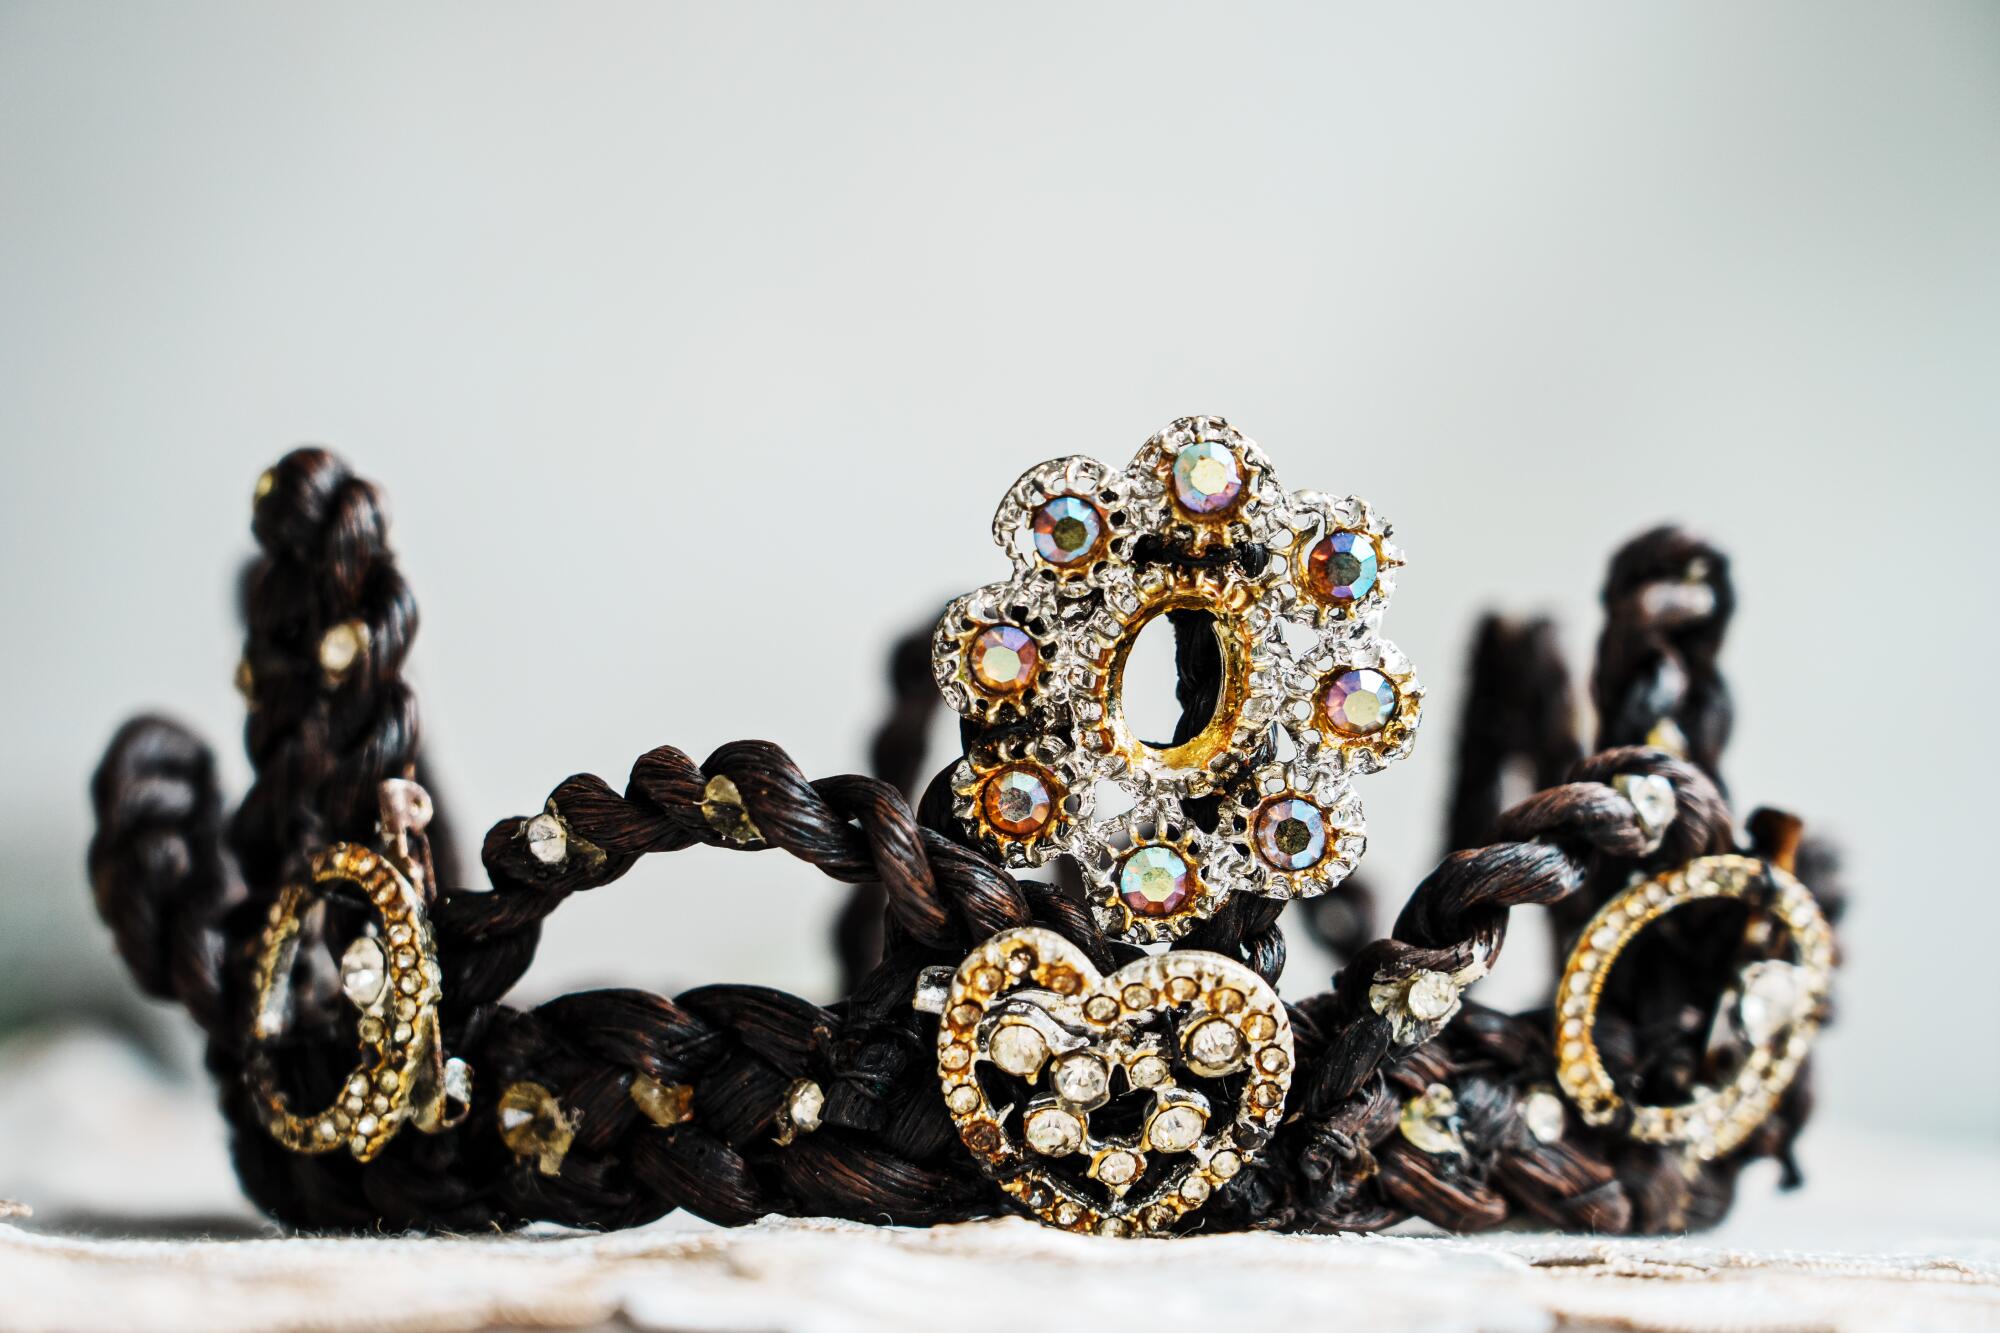 A crown of braided vanilla pods decorated with hearts and jewels.